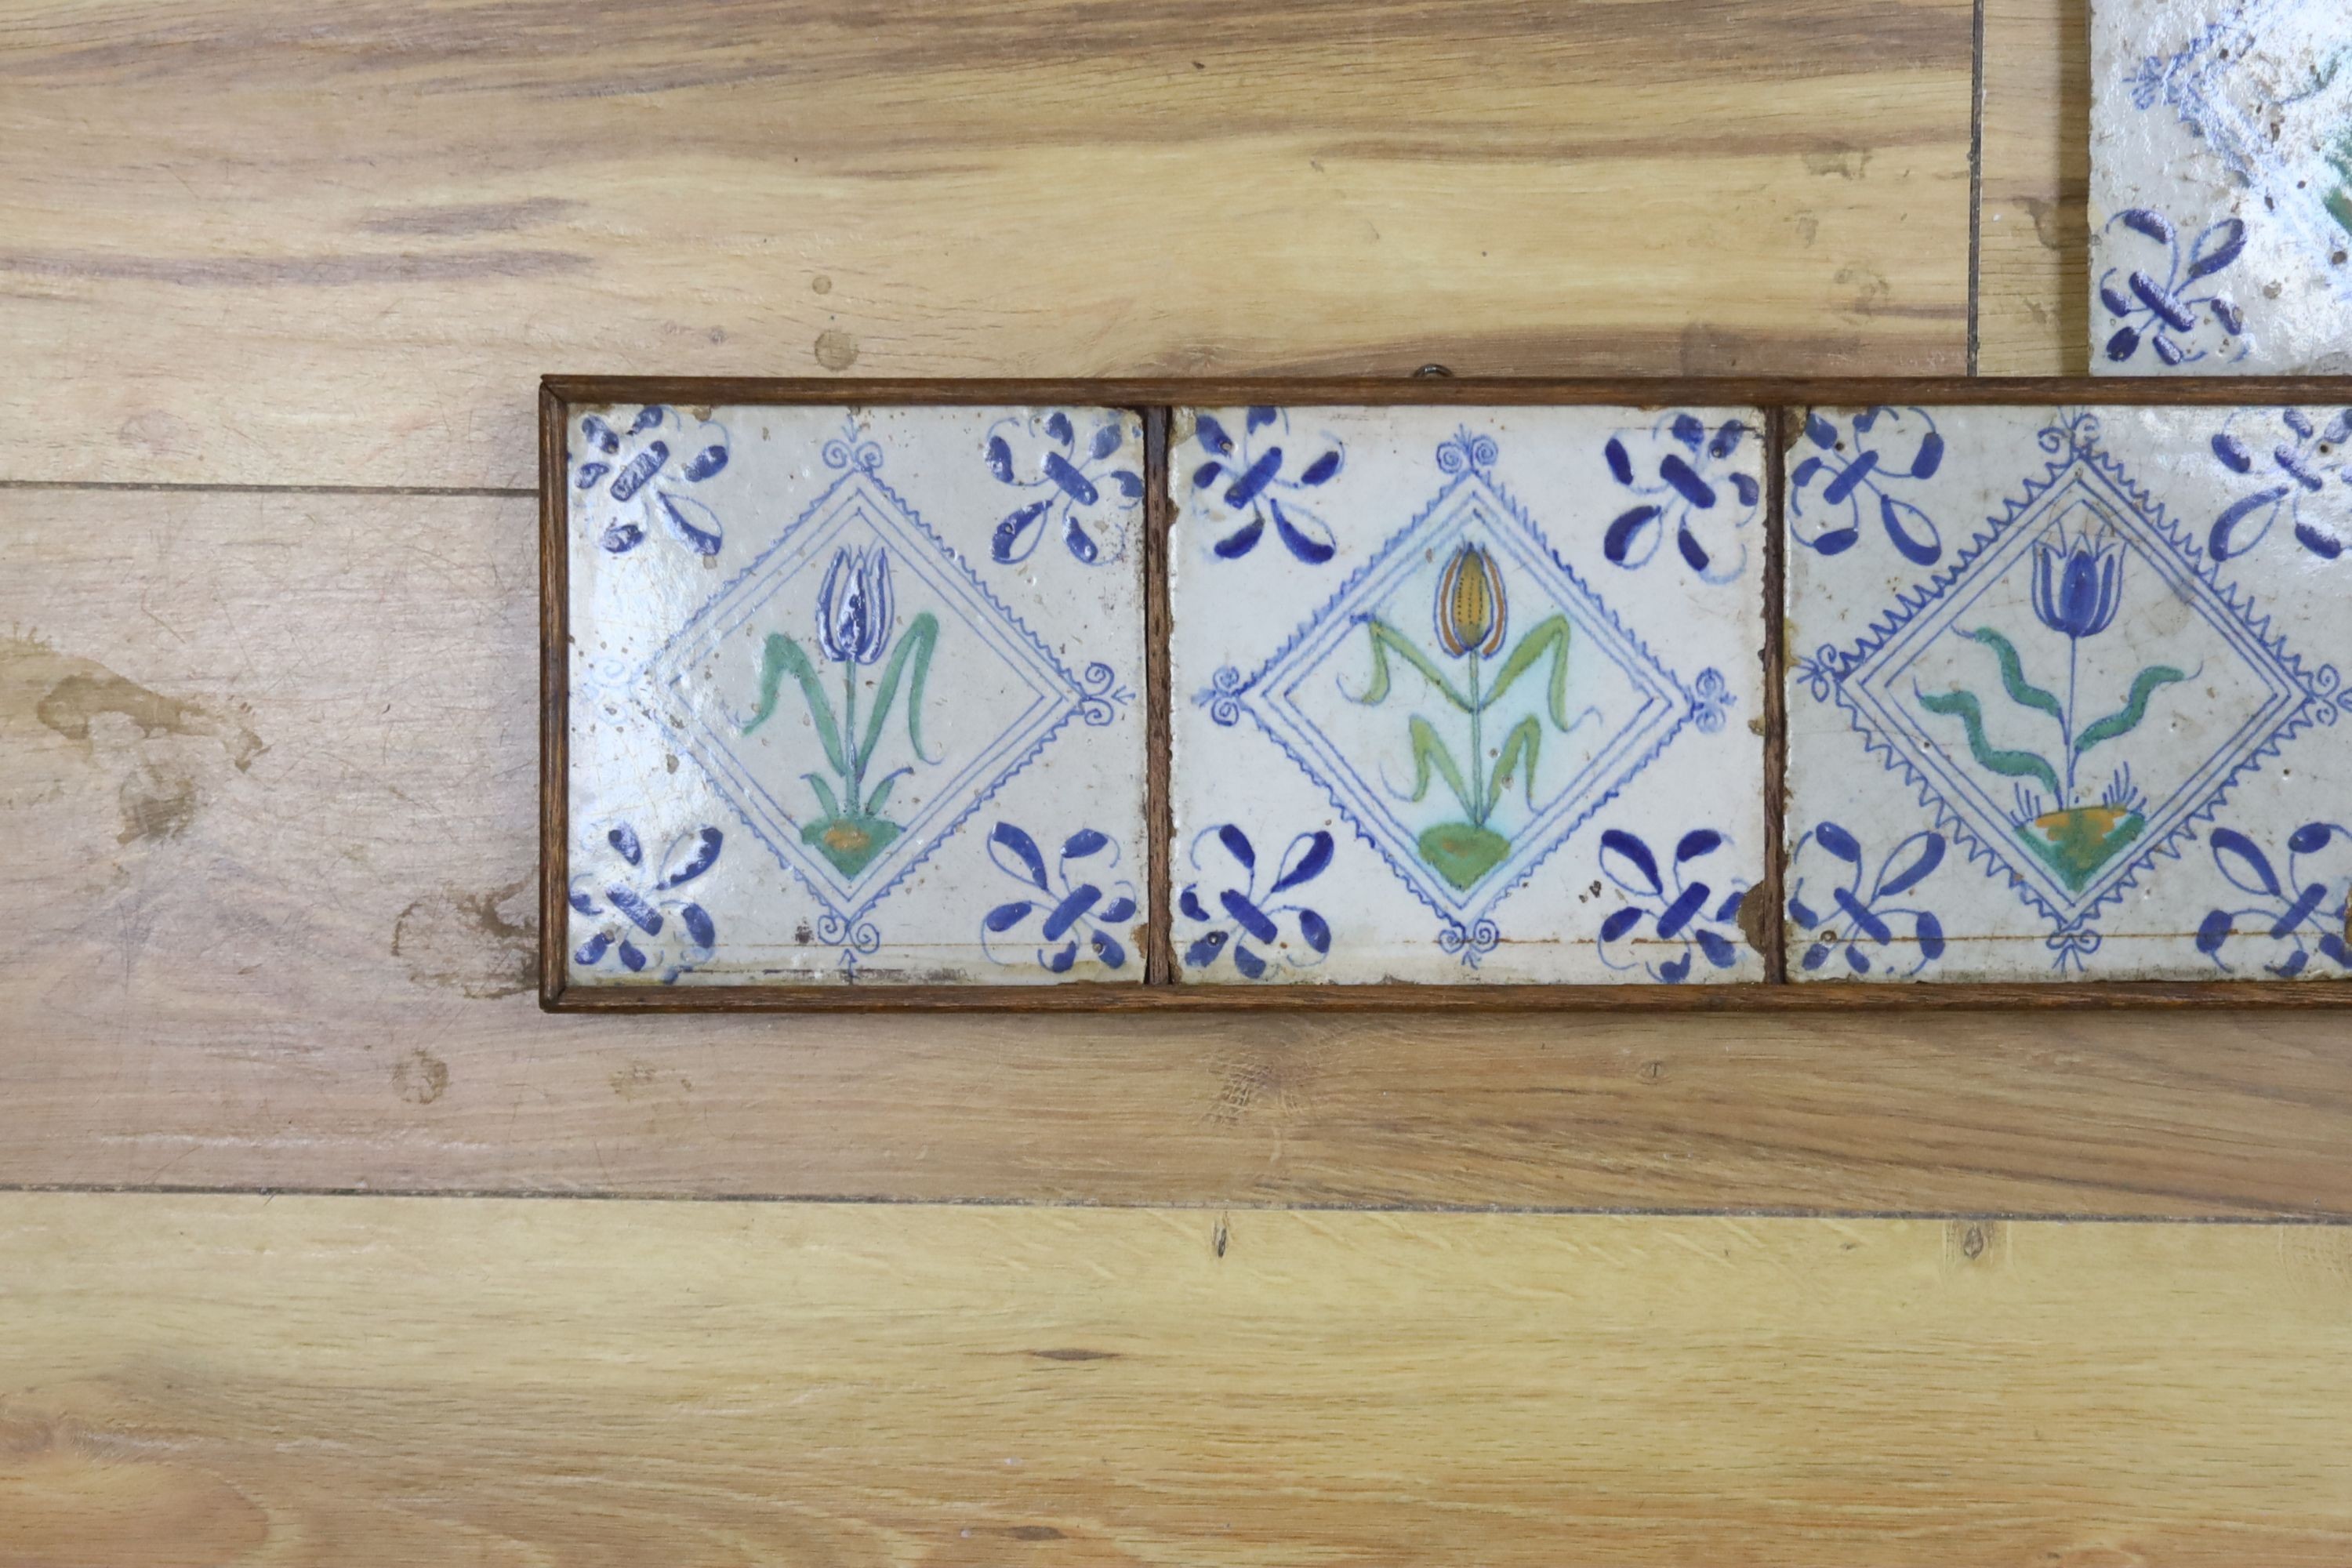 Seven 17th century Dutch Delft tiles, polychrome-decorated with tulips and having fleur-de-lys corners (framed 95cm)